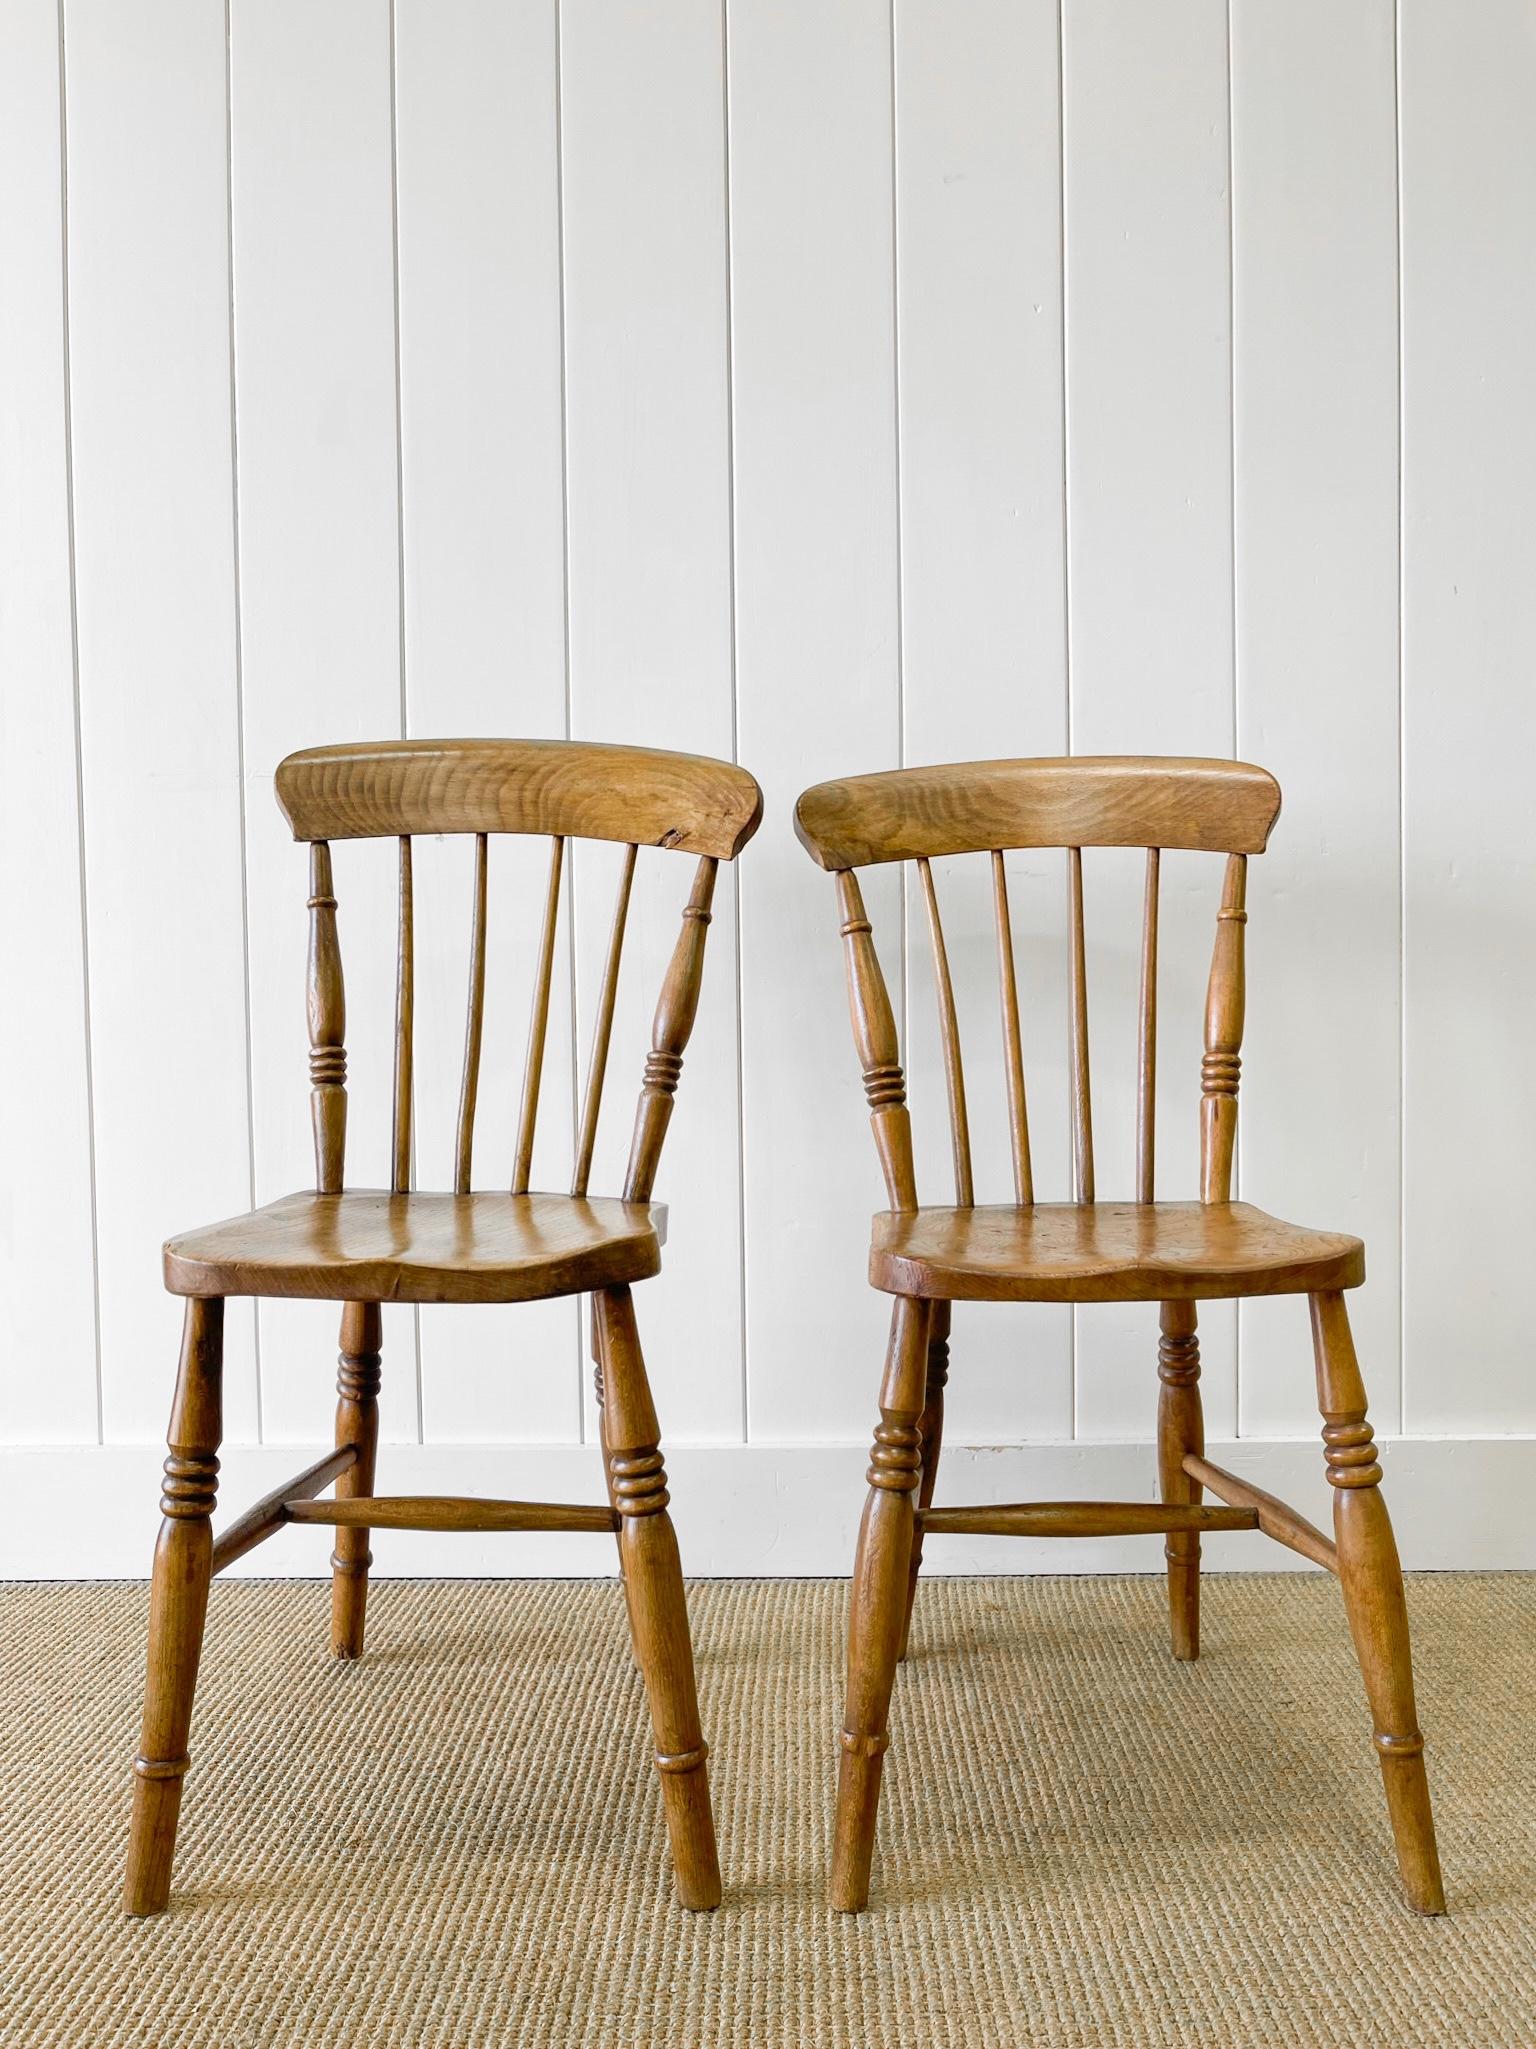 Victorian An Antique Set of 4 Early 19th Century Stick Back Chairs For Sale